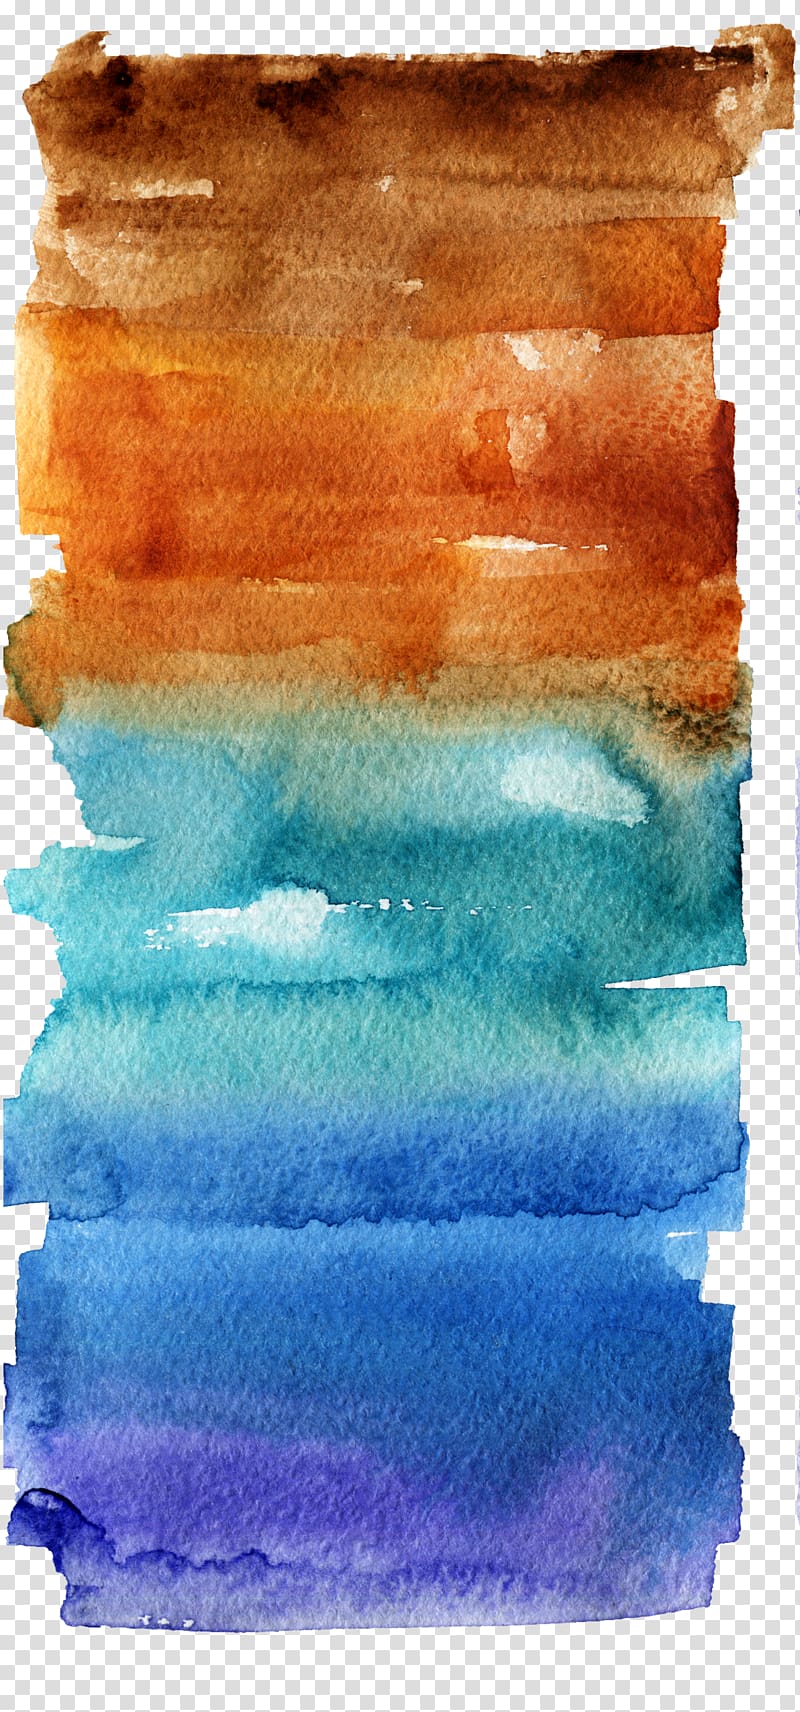 orange, teal, and purple abstract painting, Paper Watercolor painting Paintbrush Ink, Watercolor paint brushes transparent background PNG clipart